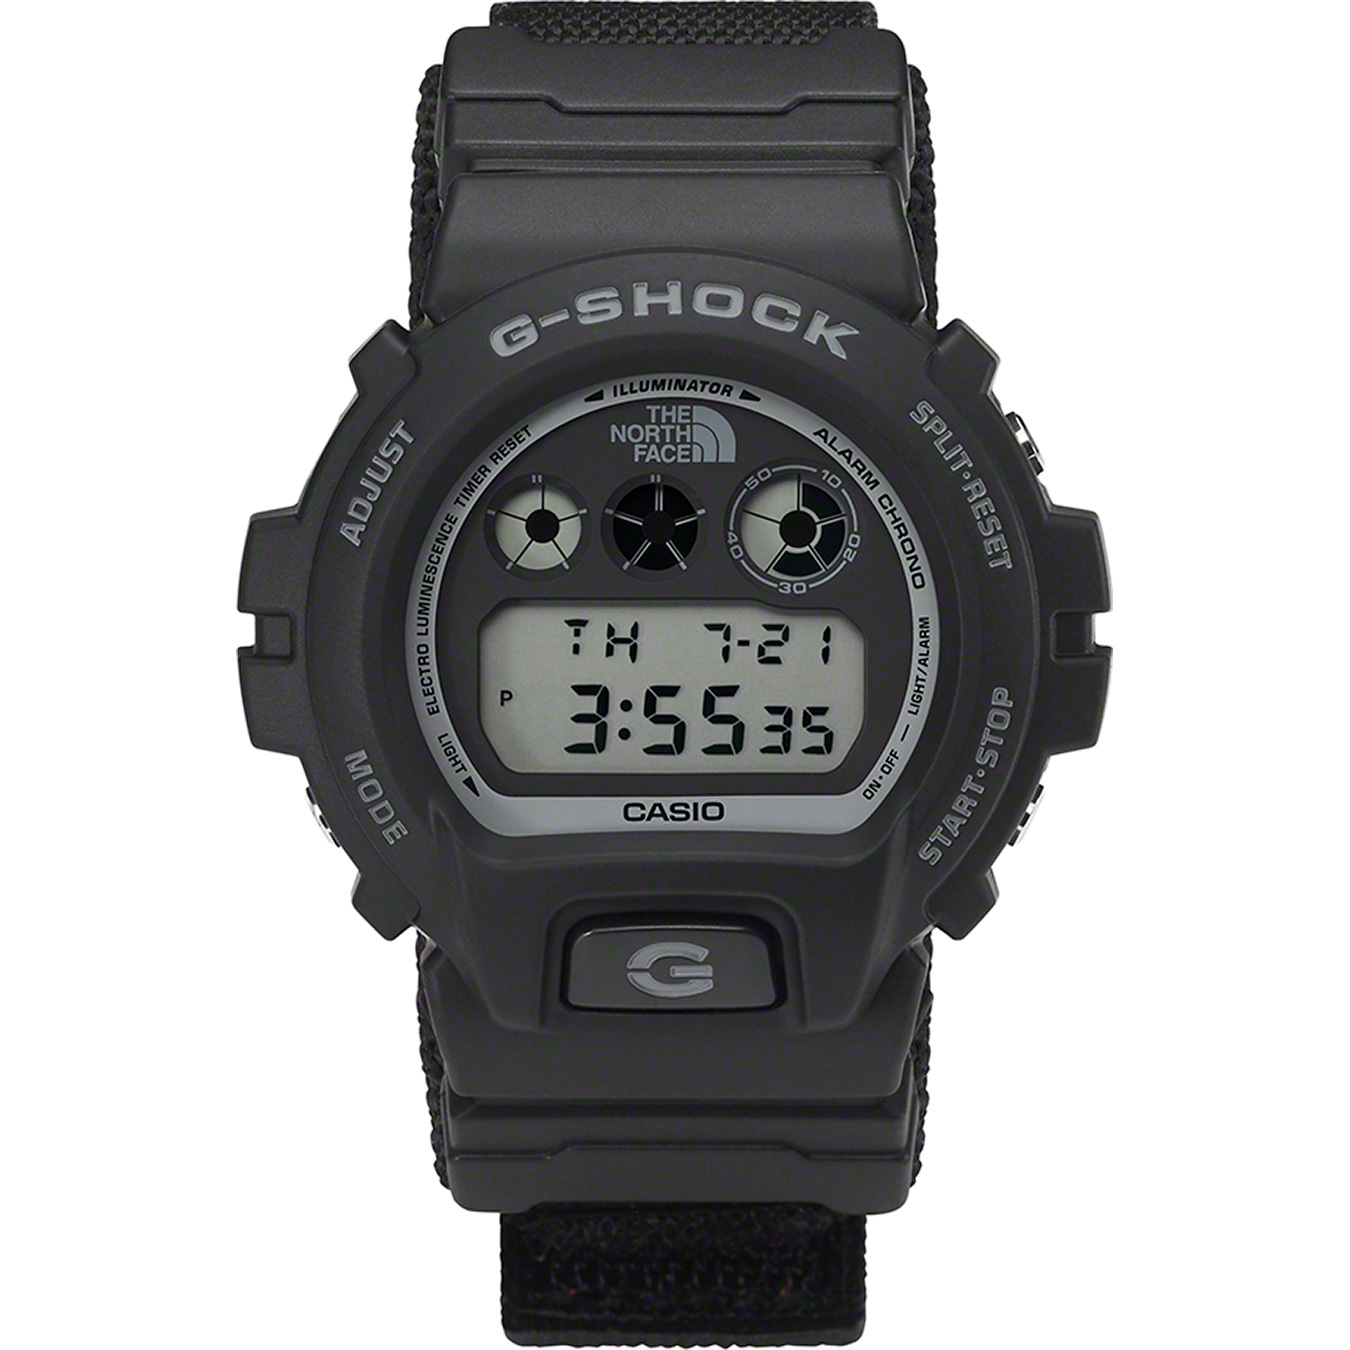 Supreme®/The North Face® G-SHOCK Watch